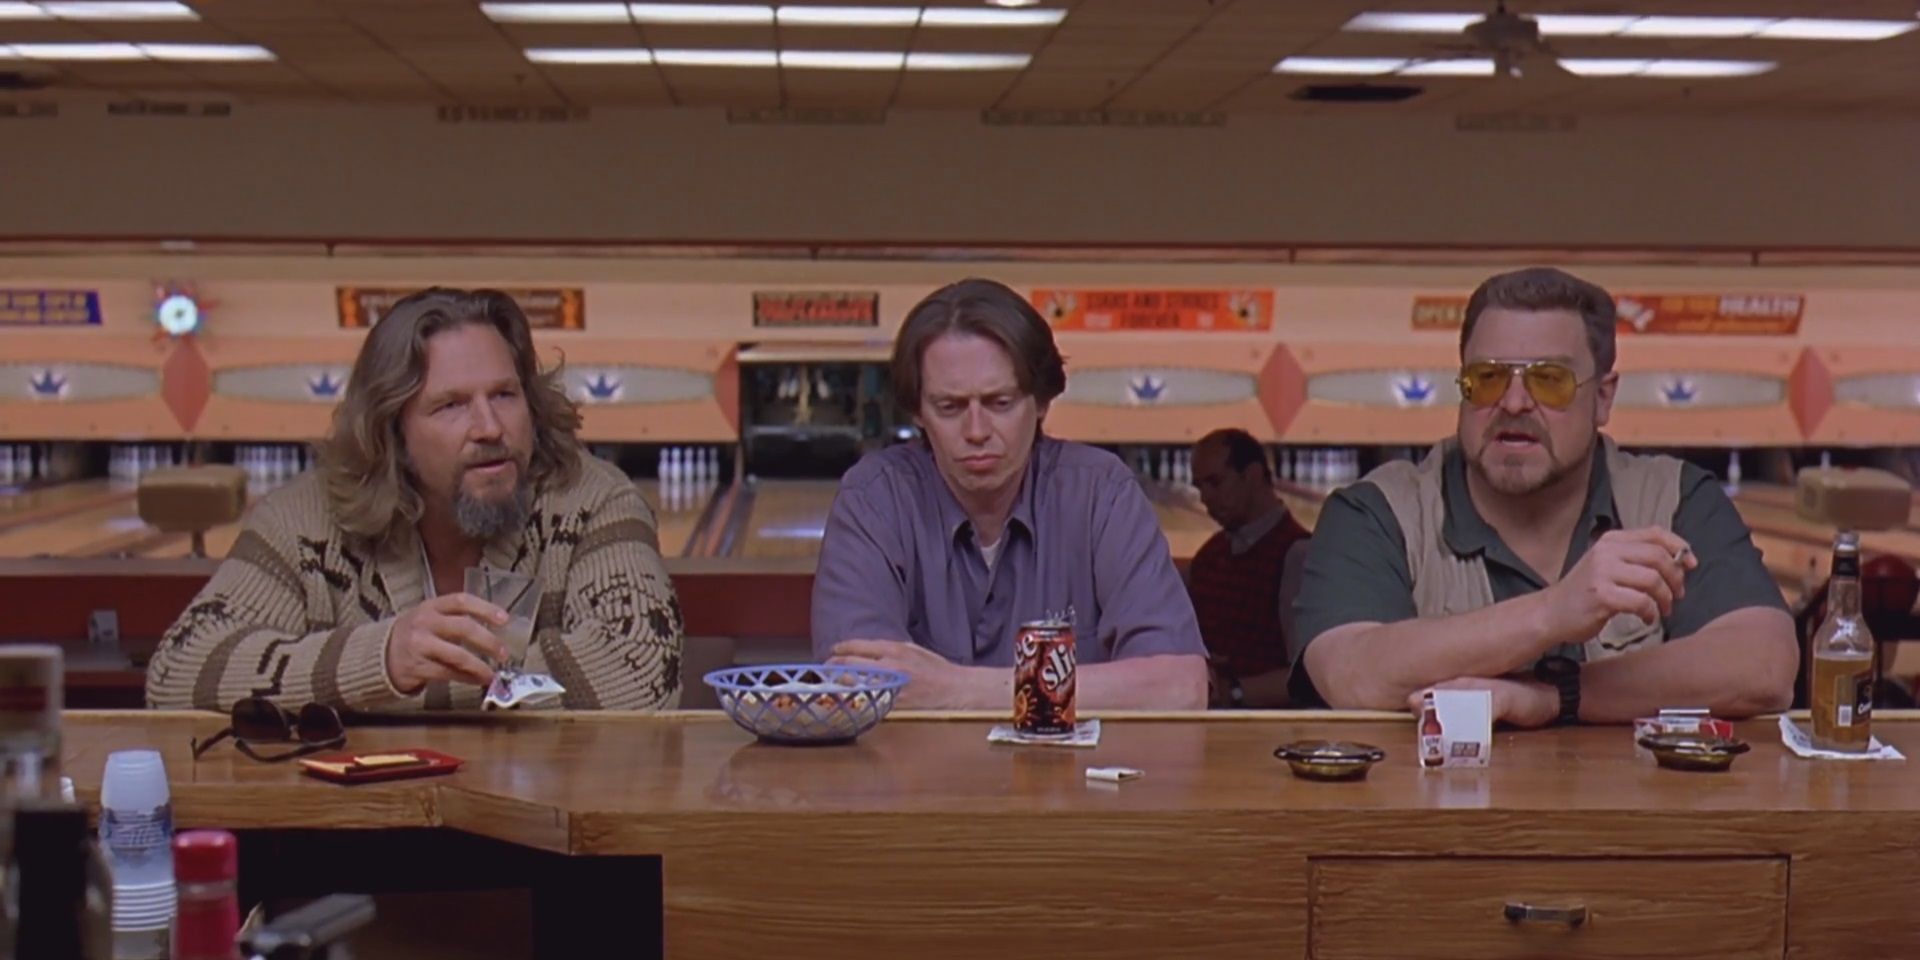 Dude, Walter, and Donny sit at the bar in the bowling alley in The Big Lebowski